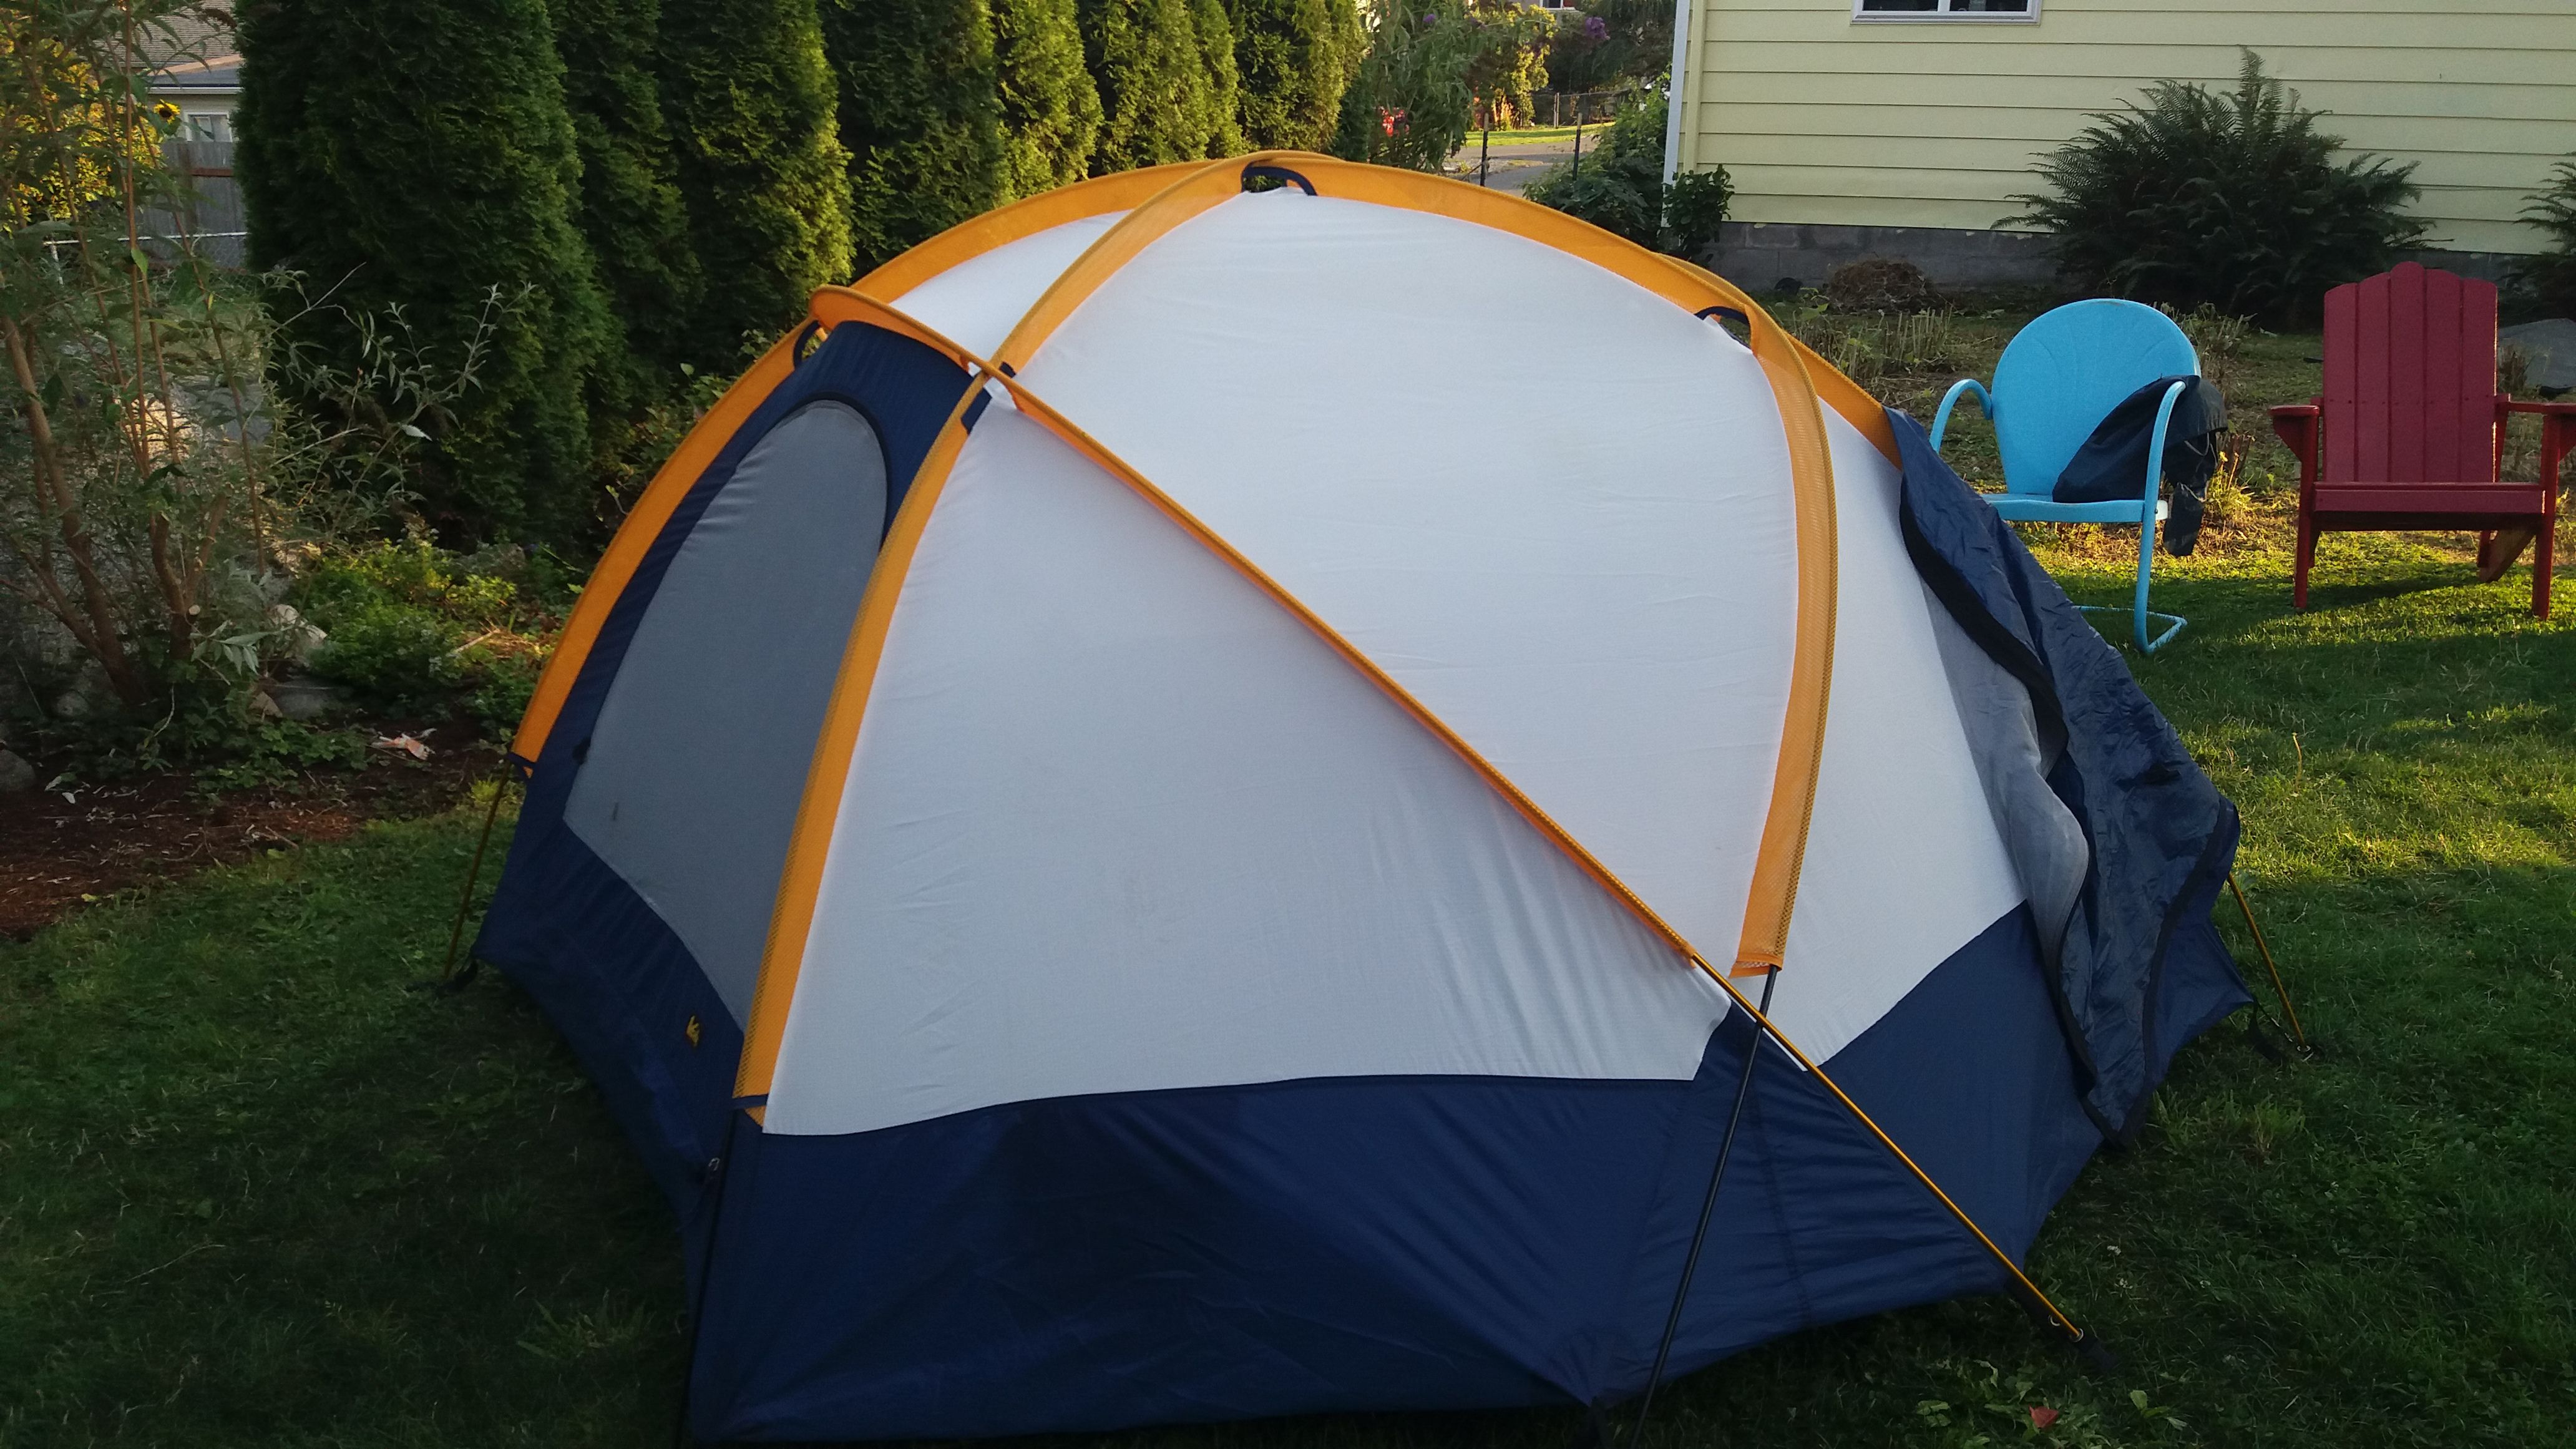 REI Geo Dome 4 Tent. NO RAIN FLY for Sale in Everett, WA - OfferUp